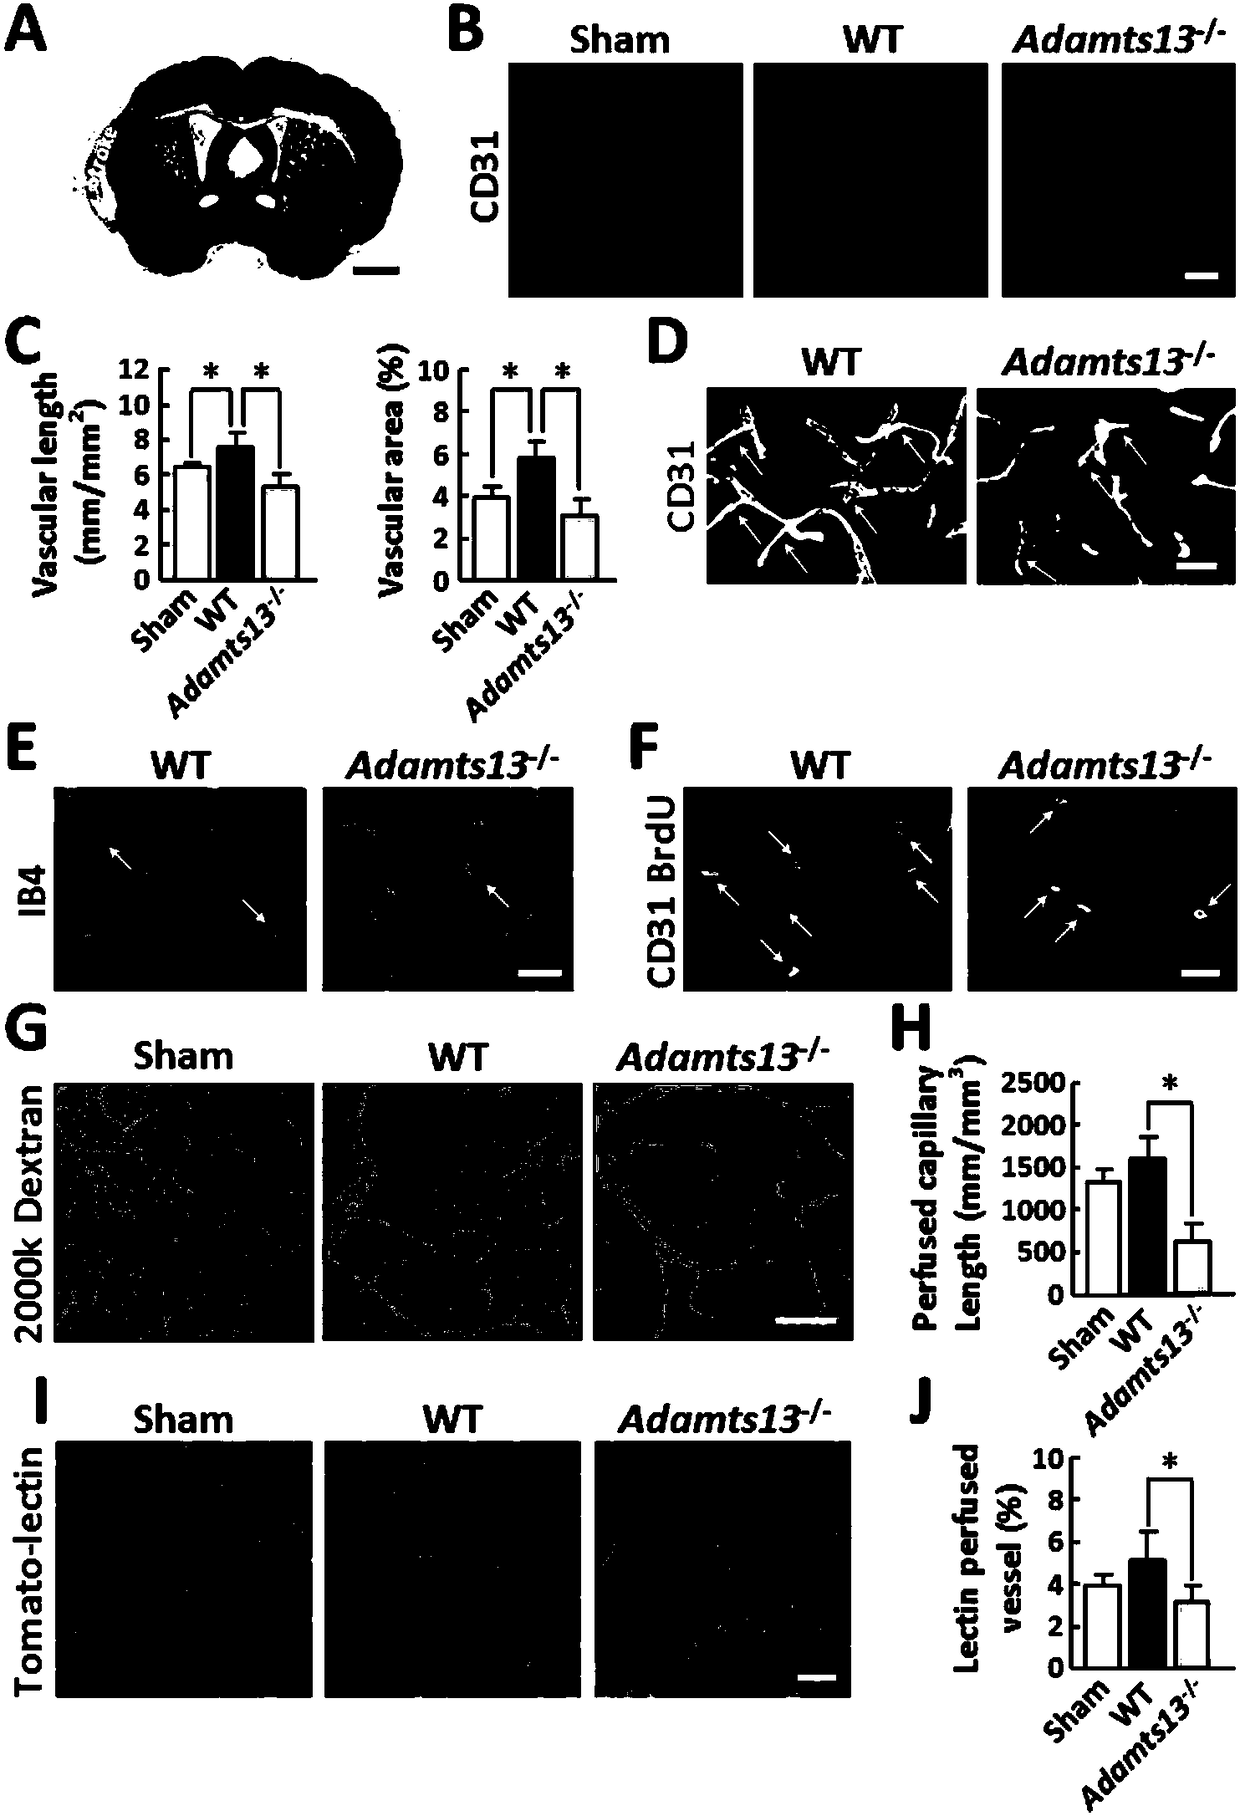 Application of ADAMTS13 to preparation of drugs used for promoting vascular remodeling after stroke